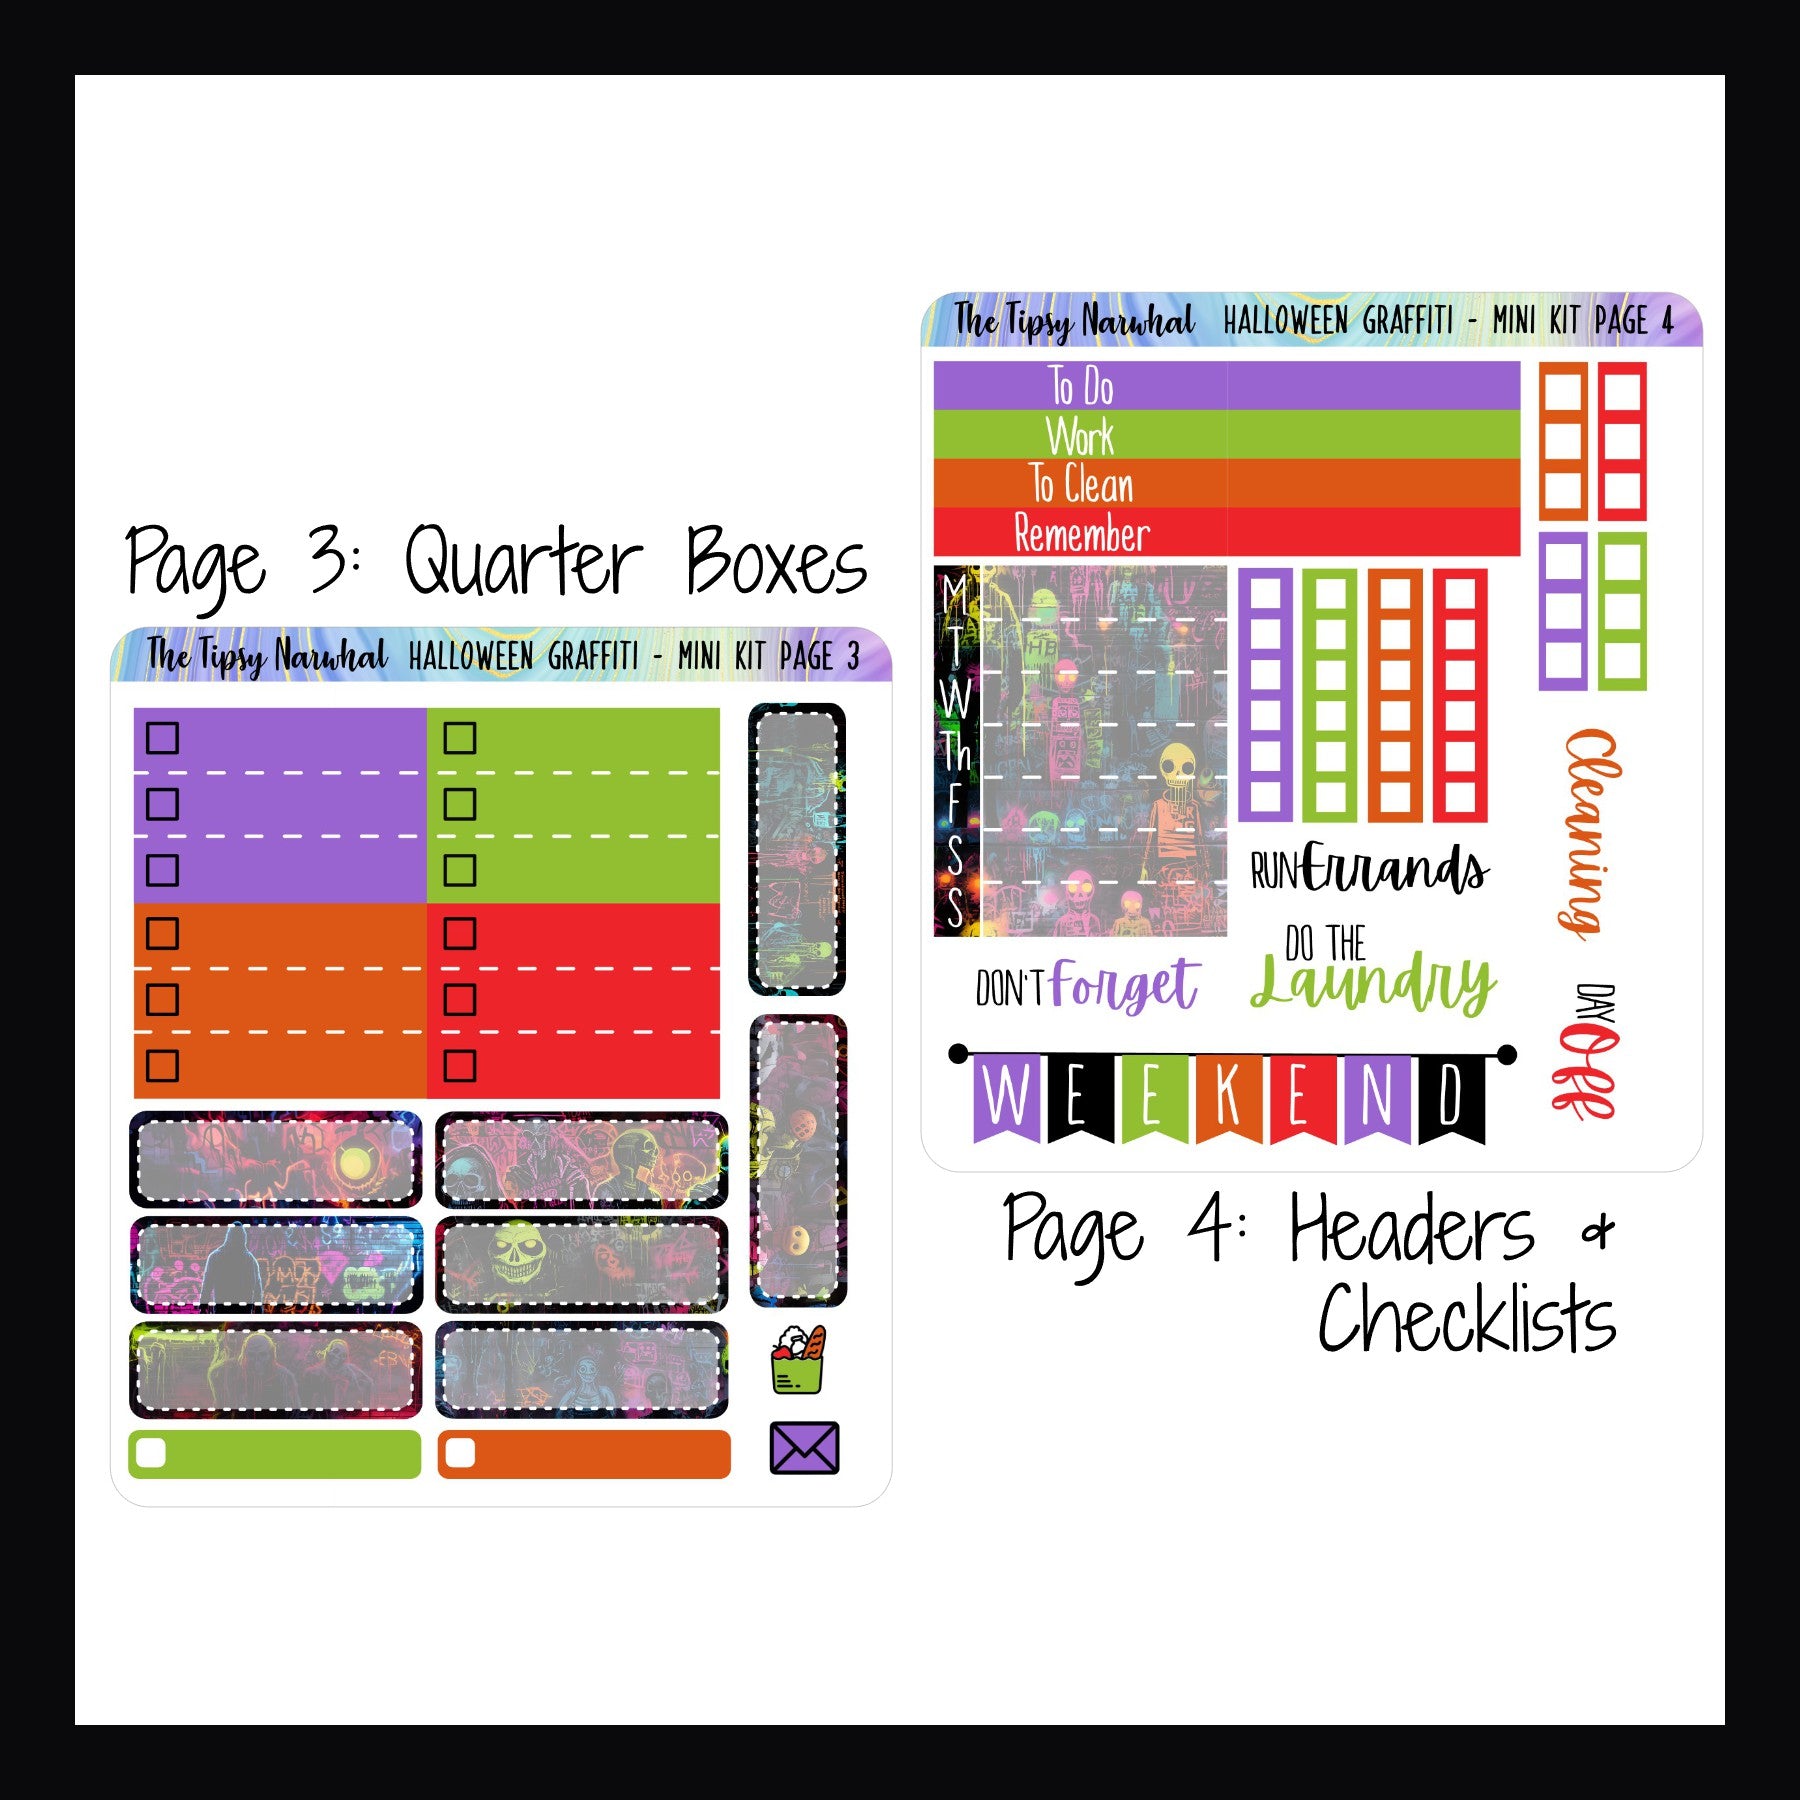 Halloween Graffiti Mini Vertical Kit Pages 3 and 4, Checklist Stickers, Header Stickers, Weekly Stickers, Quarter Box Stickers, Weekend Banner, Script Stickers, Halloween Stickers, Scary Stickers, Spooky Stickers, 